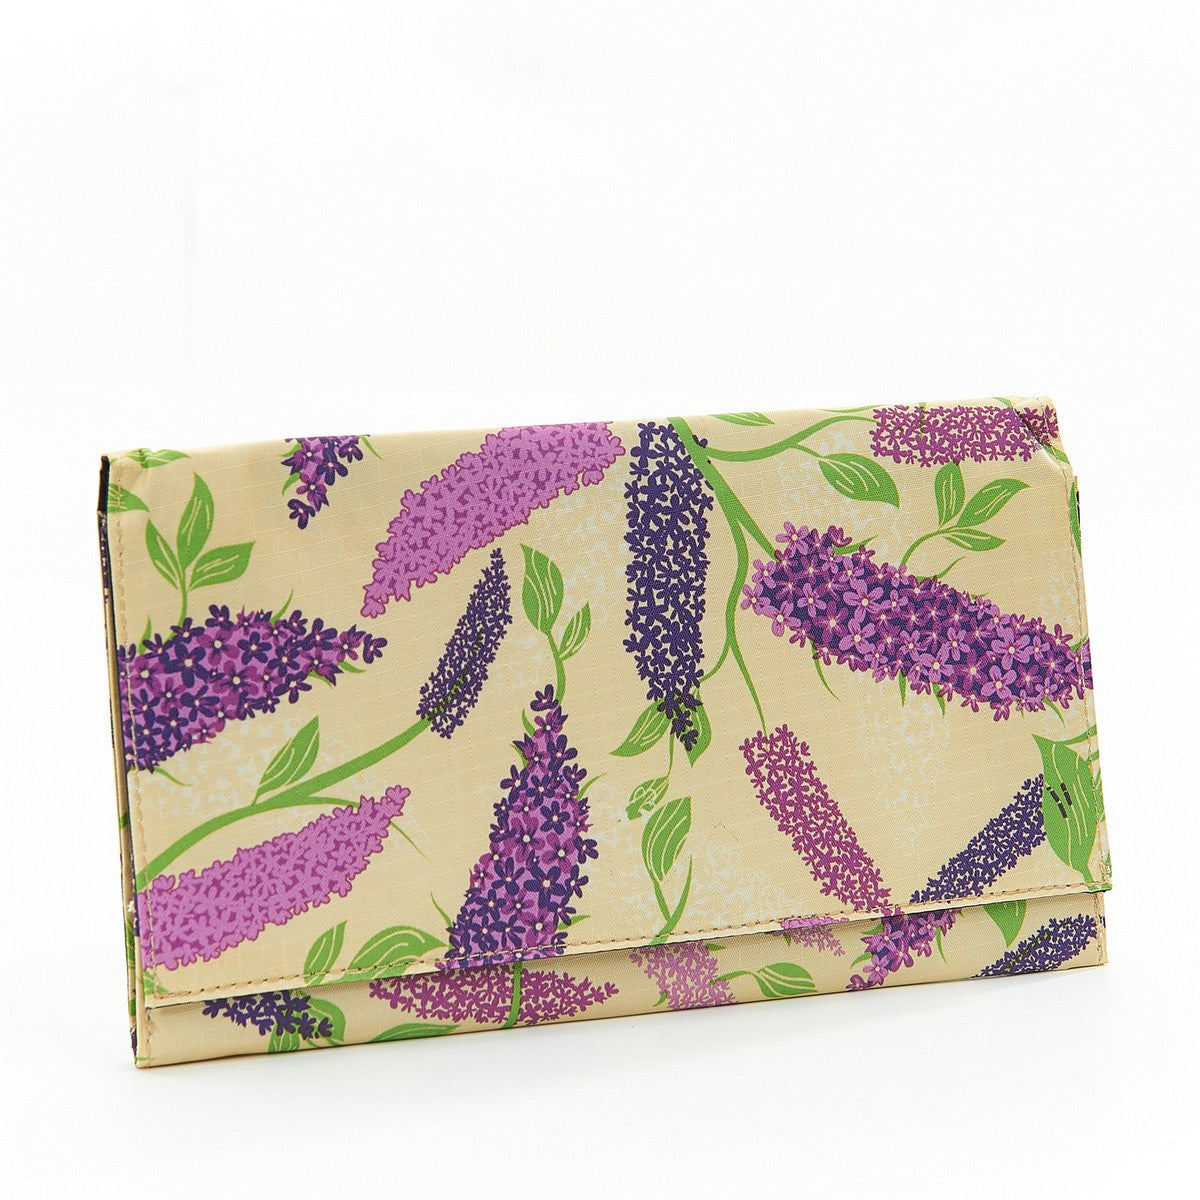 Travel Document Wallet by Eco Chic Waterproof & Durable Fabric Buddleia Design - Beige